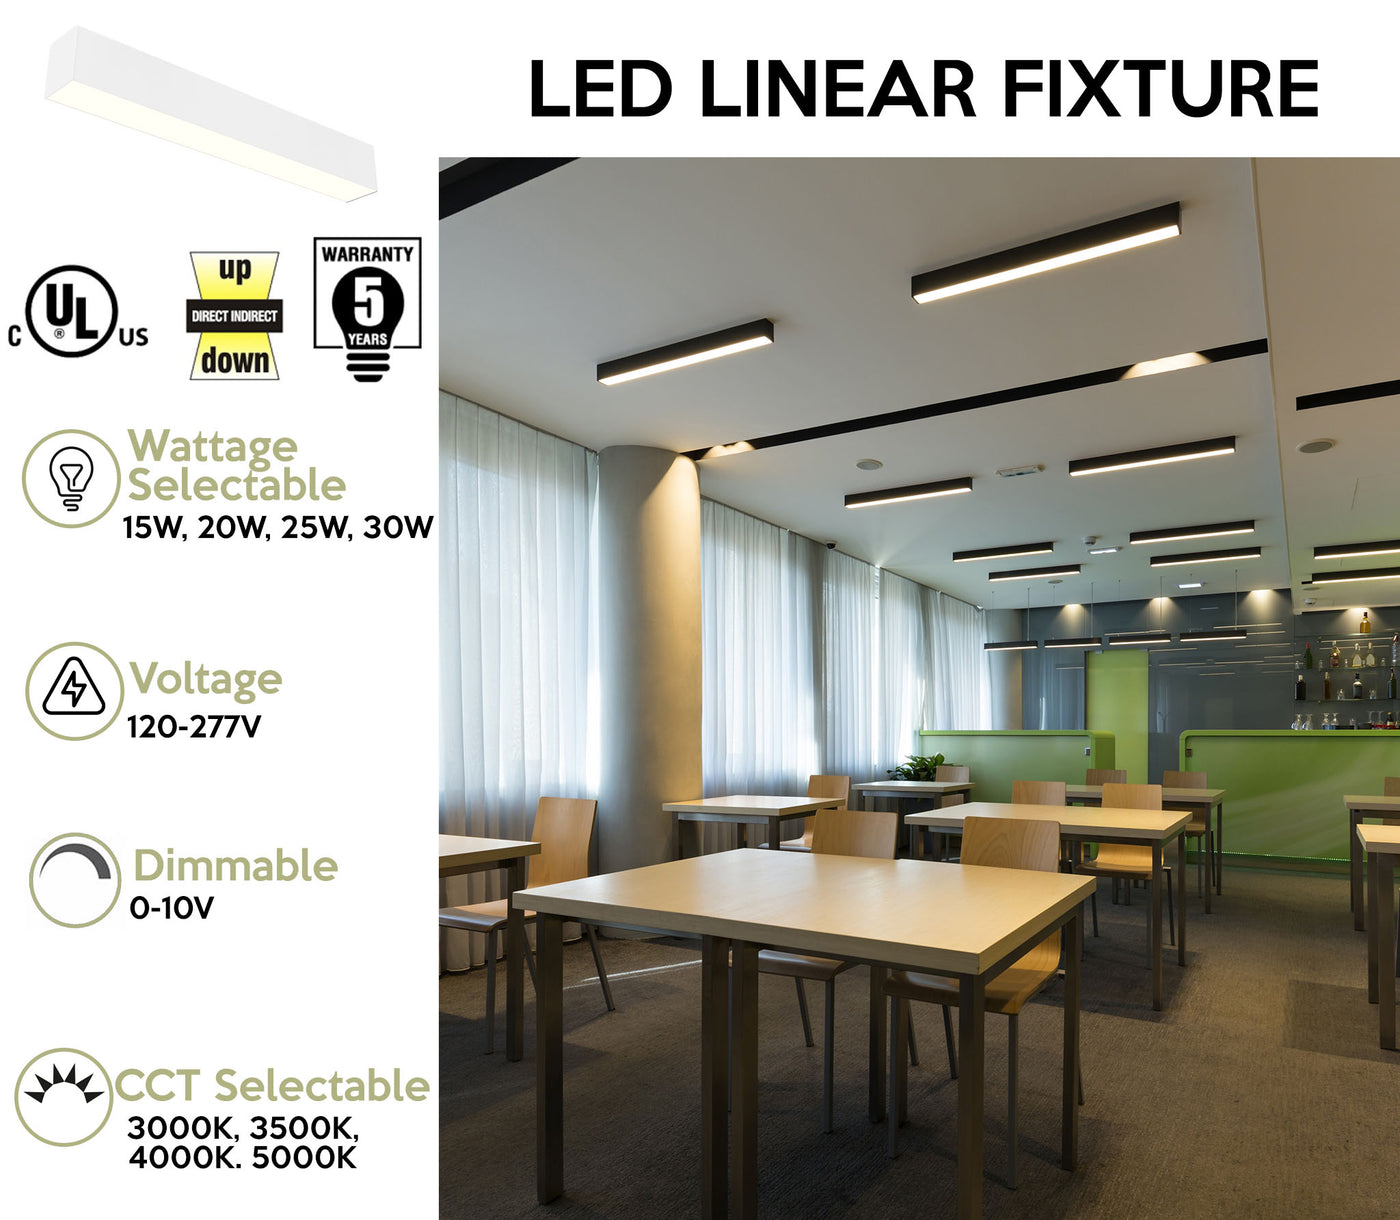 2 FT LED Direct/Indirect Suspended Linear Fixture G2, 2200 Lumen Max, Wattage and CCT Selectable, 120-277V, Black or White Finish